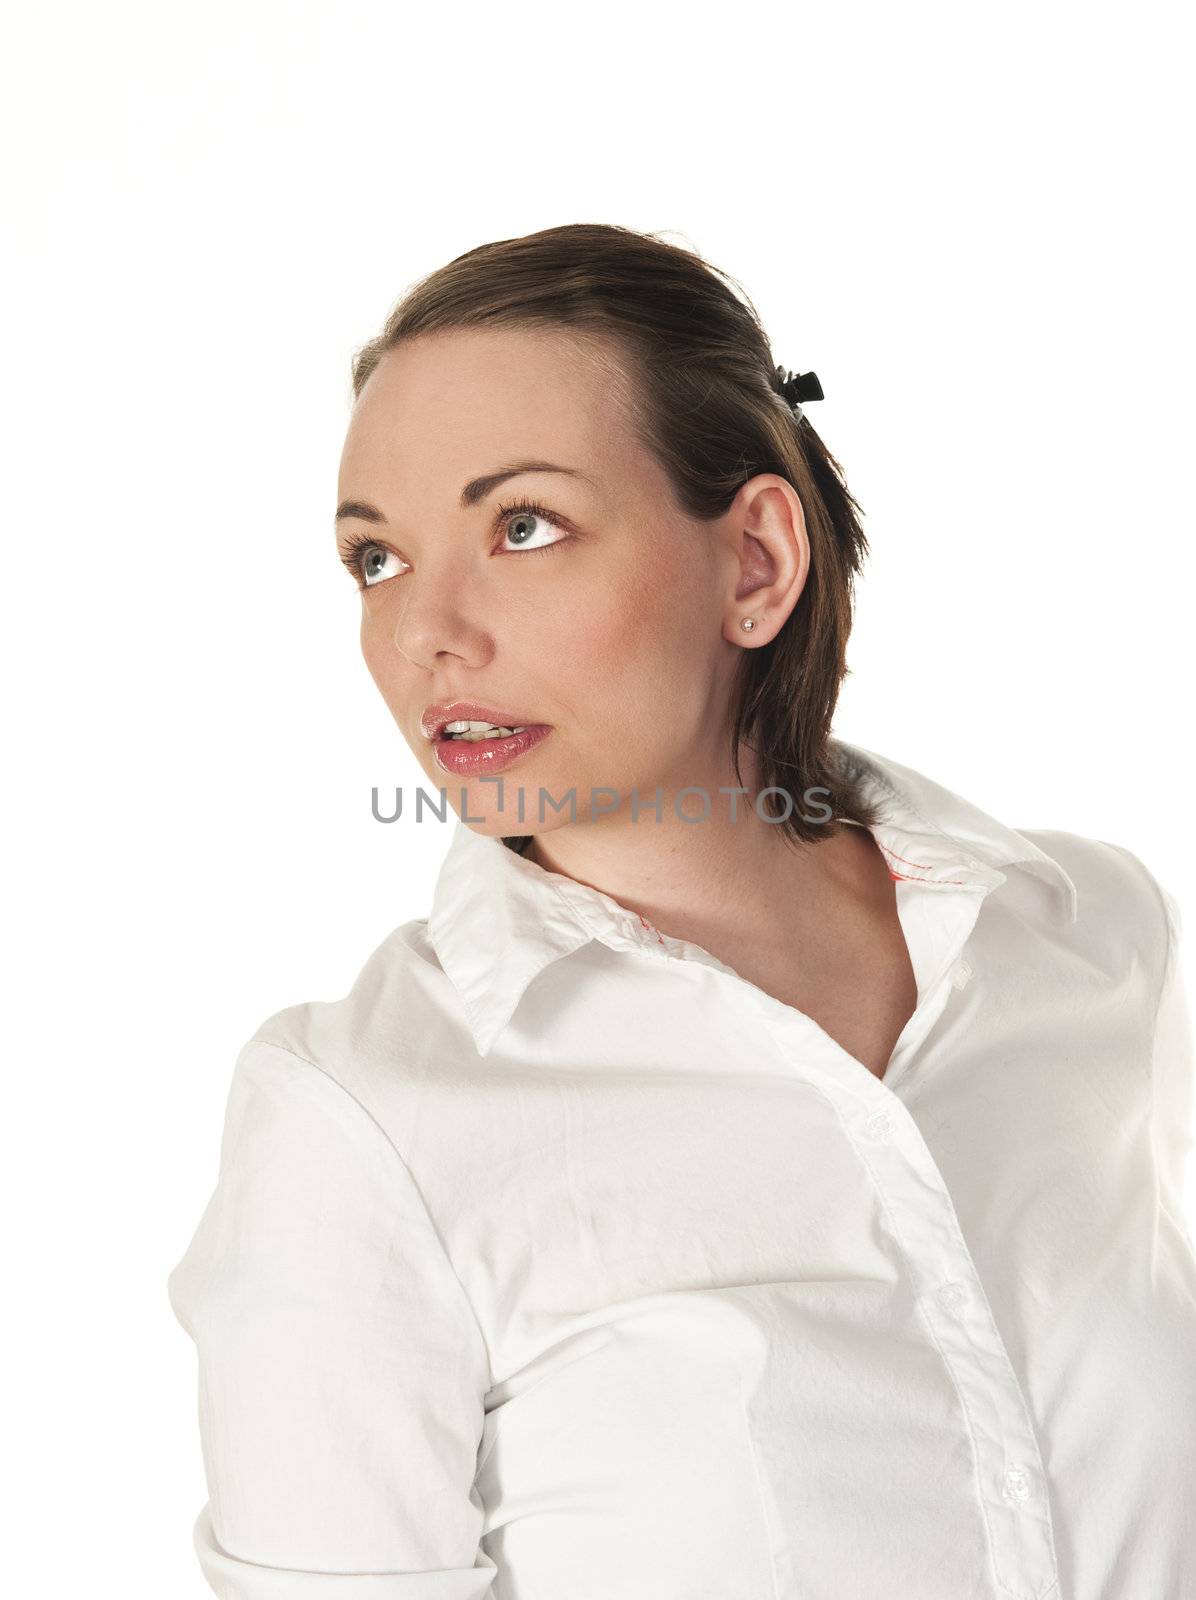 Beautiful girl distracted by something, seen against white background